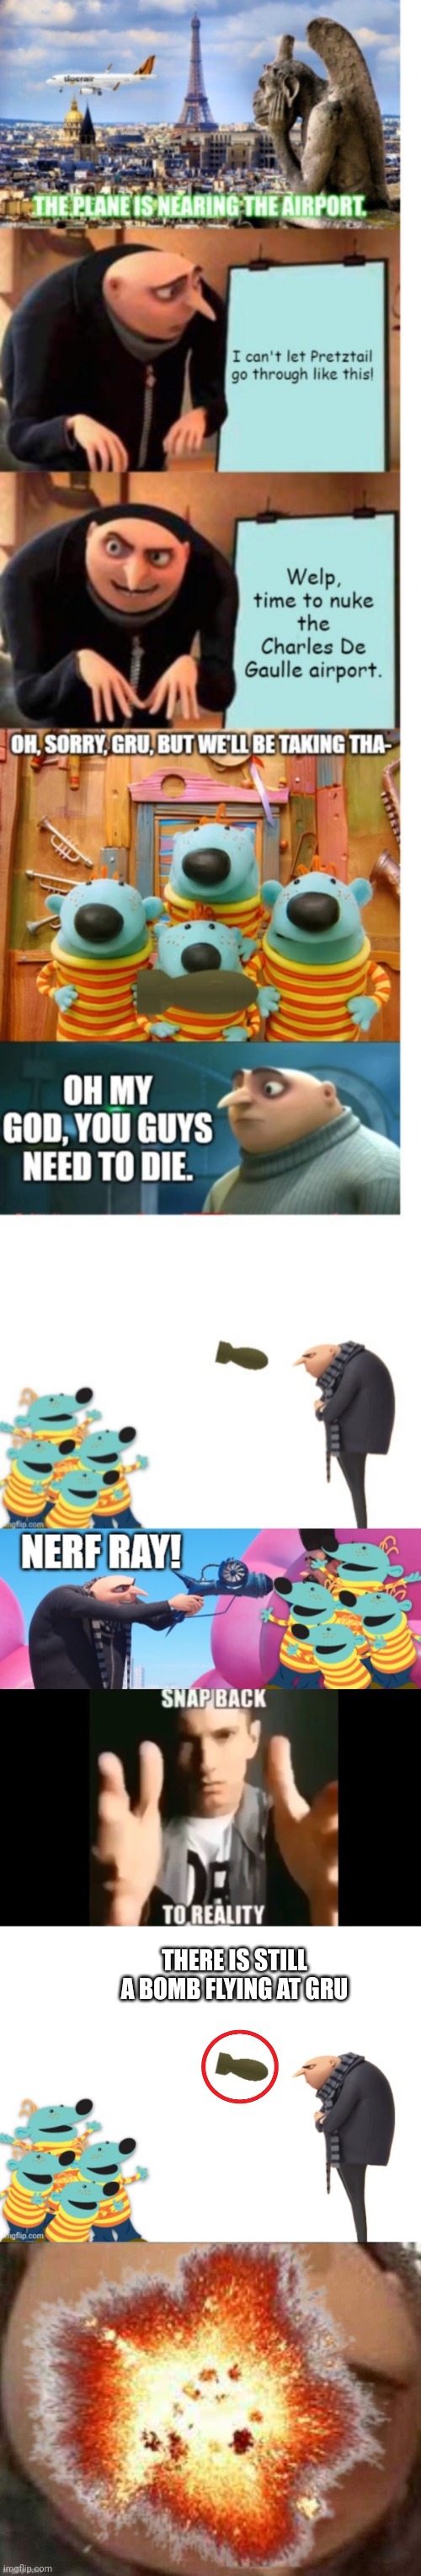 Way to avoid the problem | THERE IS STILL A BOMB FLYING AT GRU | image tagged in snap back to reality | made w/ Imgflip meme maker